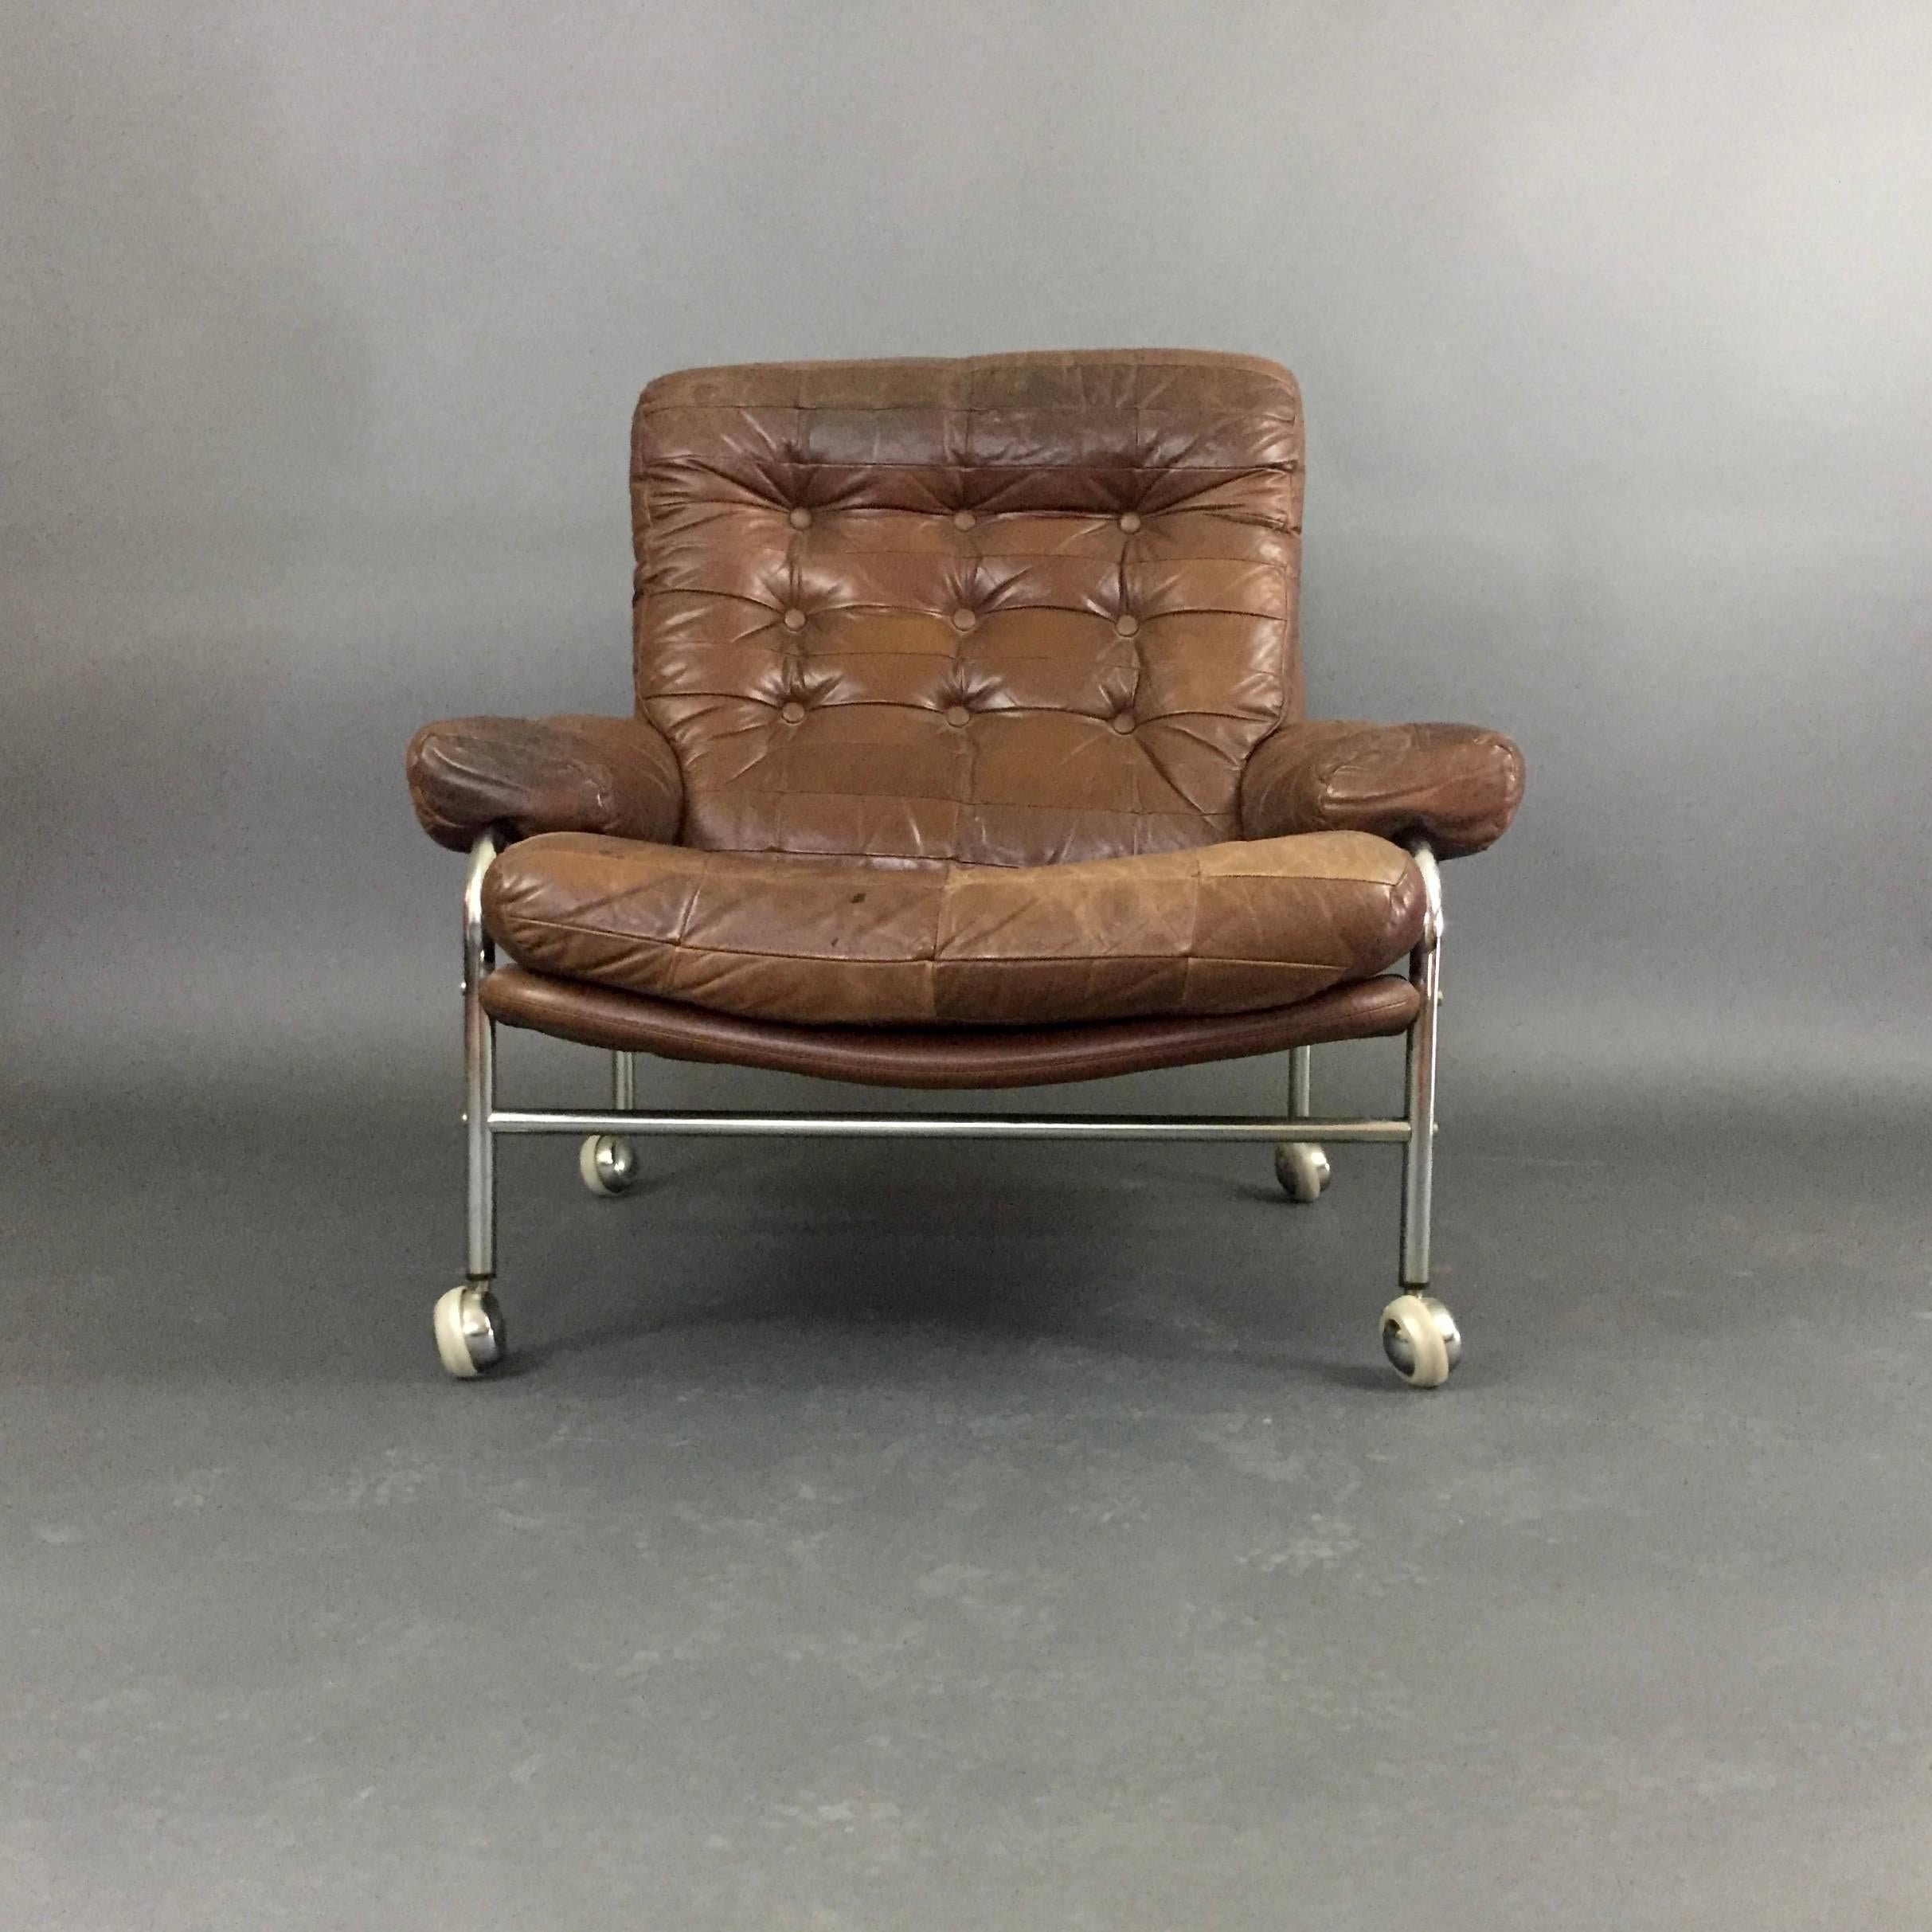 Similar to the Bruno Mathsson lounge chair, this Scandinavian example has generous proportions to the tubular chrome frame with buttoned and patchwork leather that is a classic of the 1970s design aesthetic. The seat support is curved for comfort.